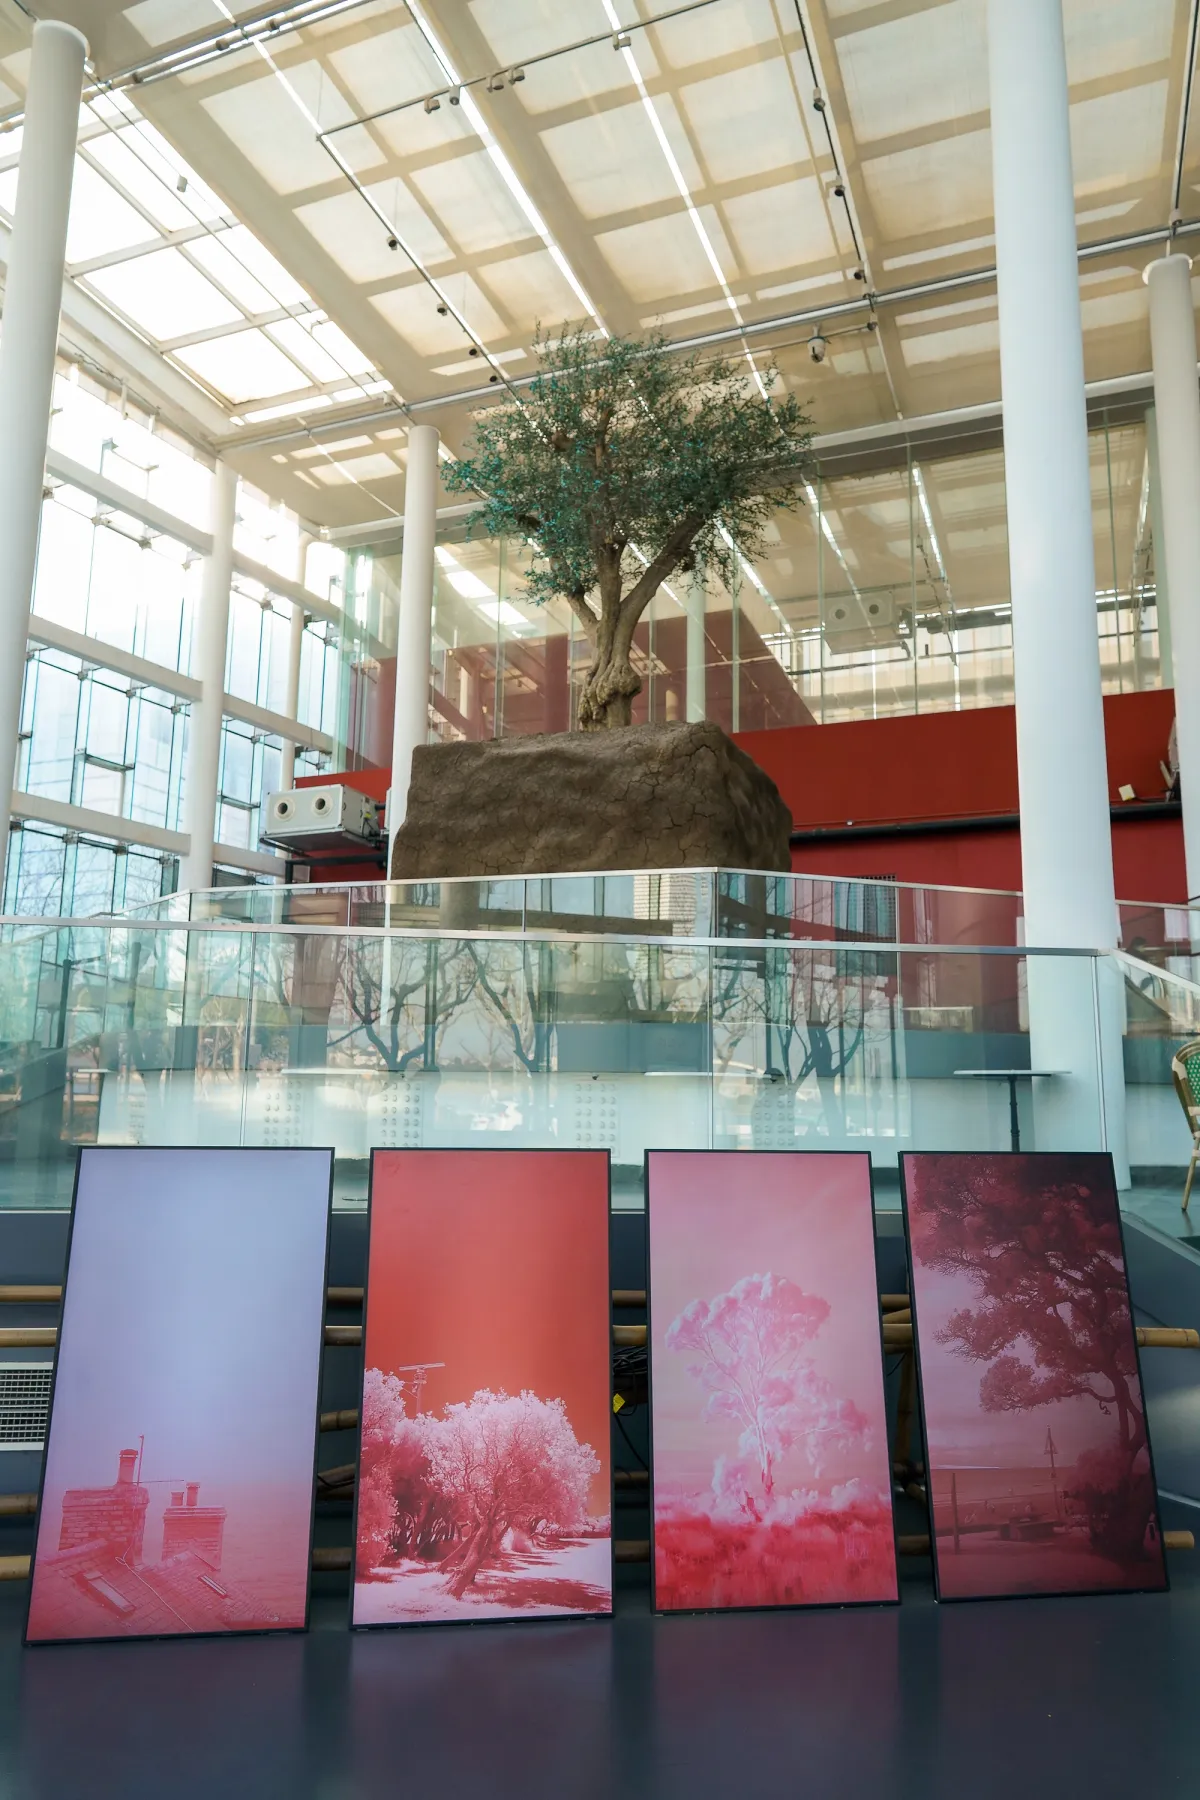 A gallery hall displaying an art installation featuring a tree planted in a soil cube in the middle. Framed art photographs of trees with a pink filter are showcased in the foreground.